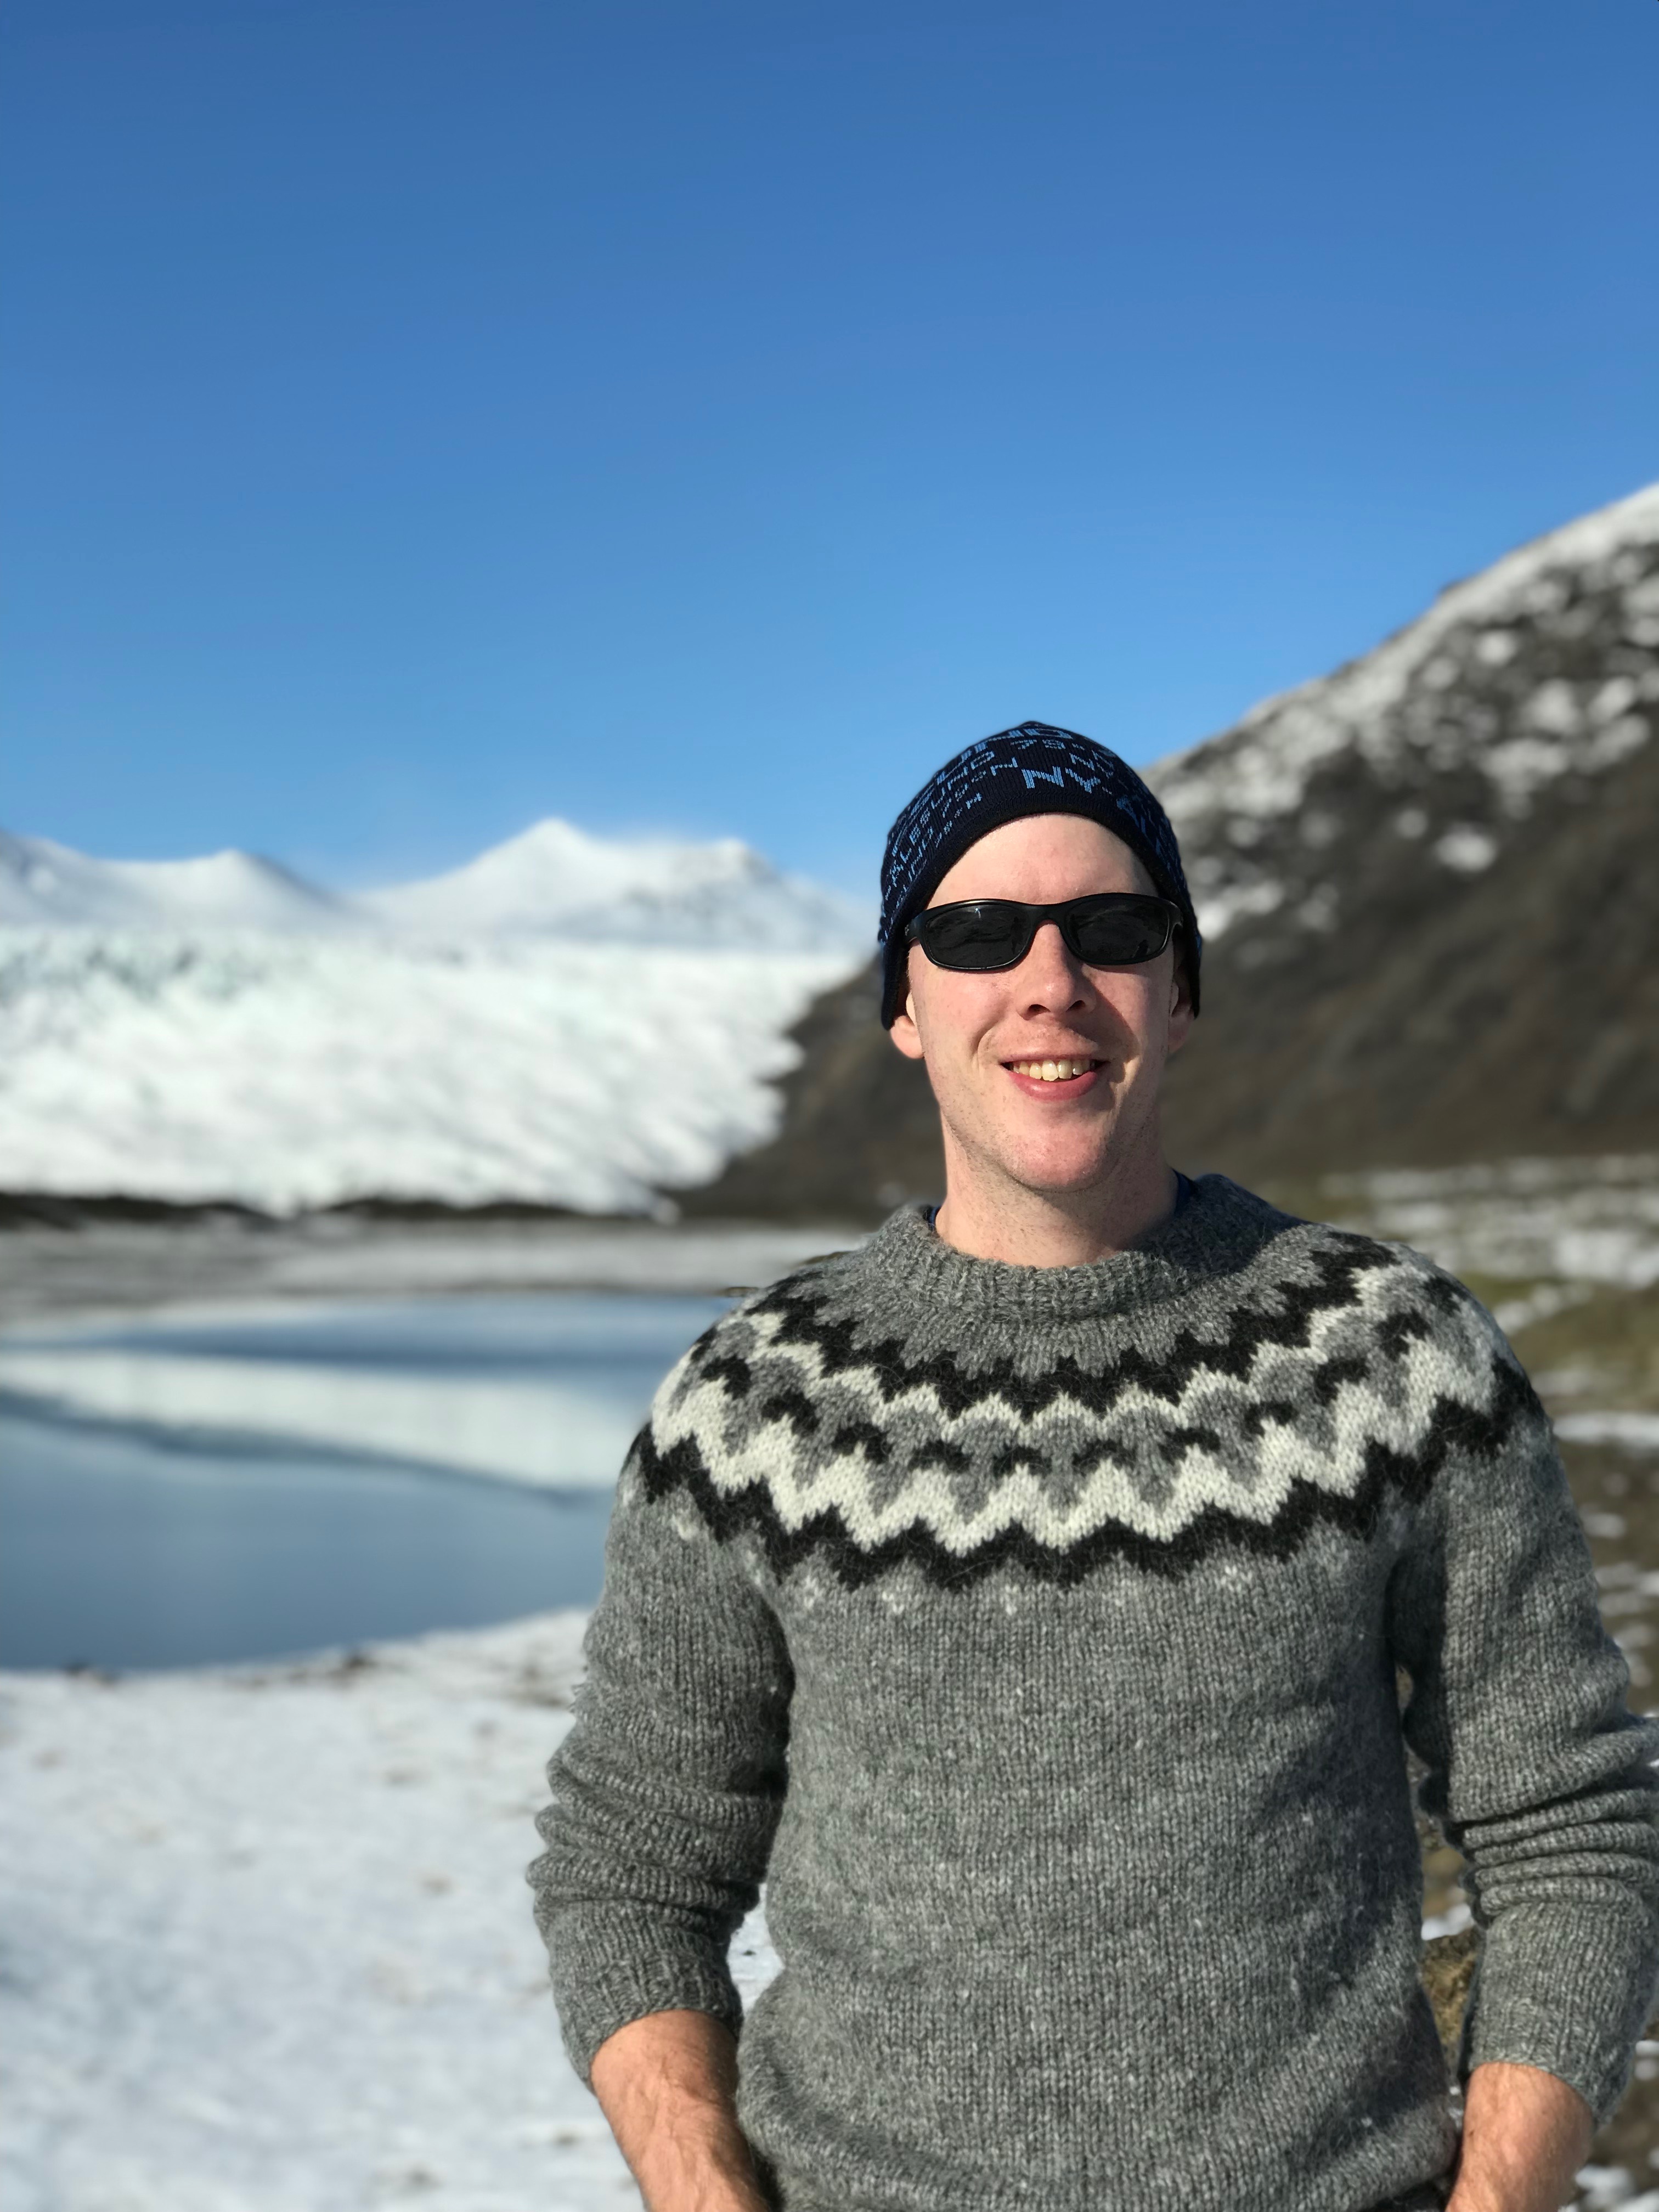 Allen stands in front of a mountainous and glaciated scene, wearing a classic Icelandic-patterned wool sweater, sunglasses and a hat.